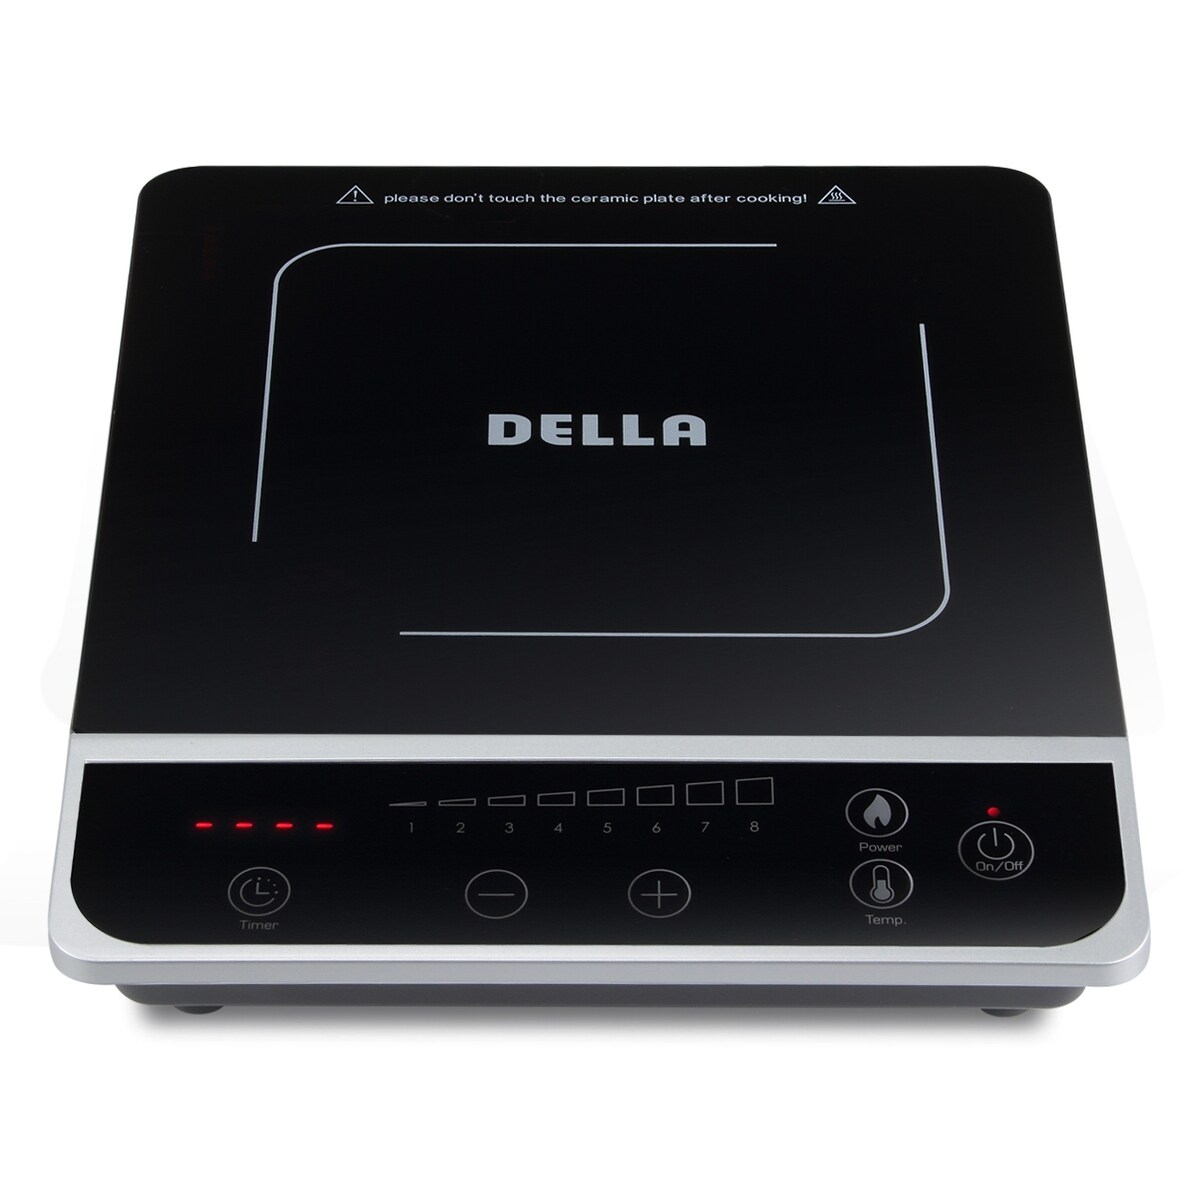 https://ak1.ostkcdn.com/images/products/is/images/direct/eda26a4e1ee8f876e442d862beefe797863a0764/Della-1800W-Portable-Induction-Cooktop-Countertop-%281%29-Single-Burner-Touch-Screen%2C-Black.jpg